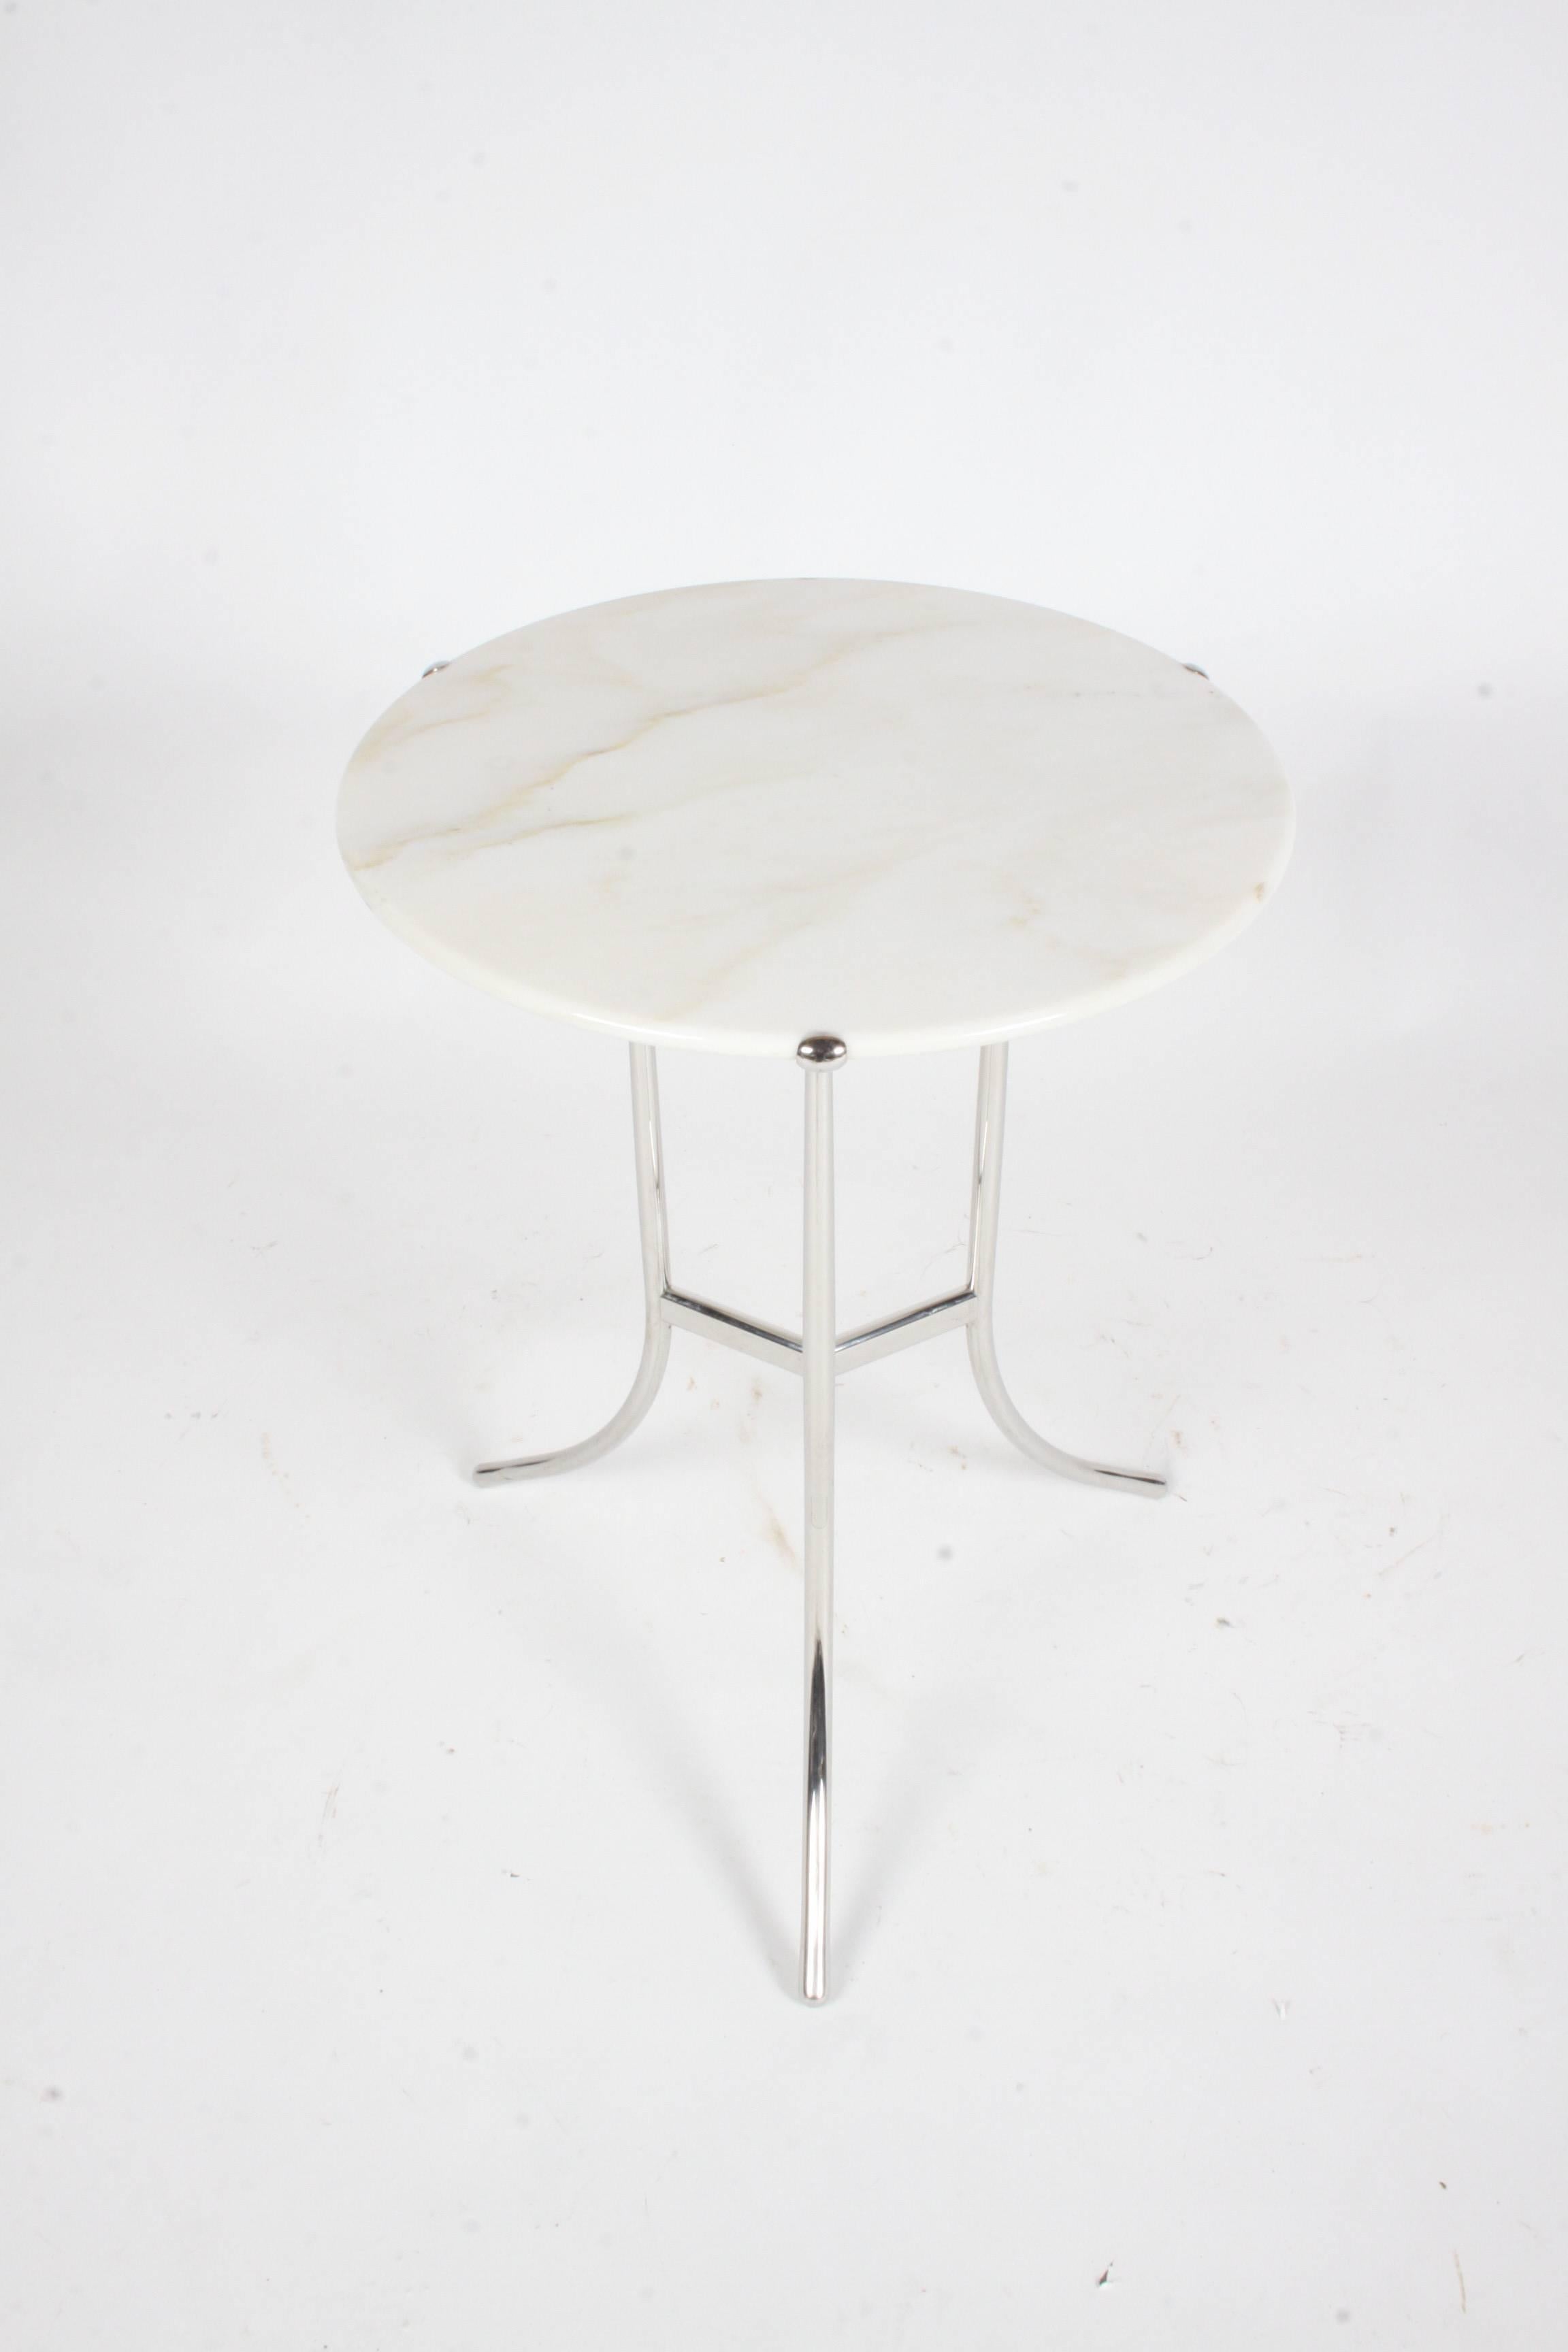 Cedric Hartman side table with white marble top. A lot of attention to detail was spent on this table, the tapered marble top, the rounded chrome legs, and the joinery. Table is in excellent condition, signed Cedric Hartman, made in the USA and has